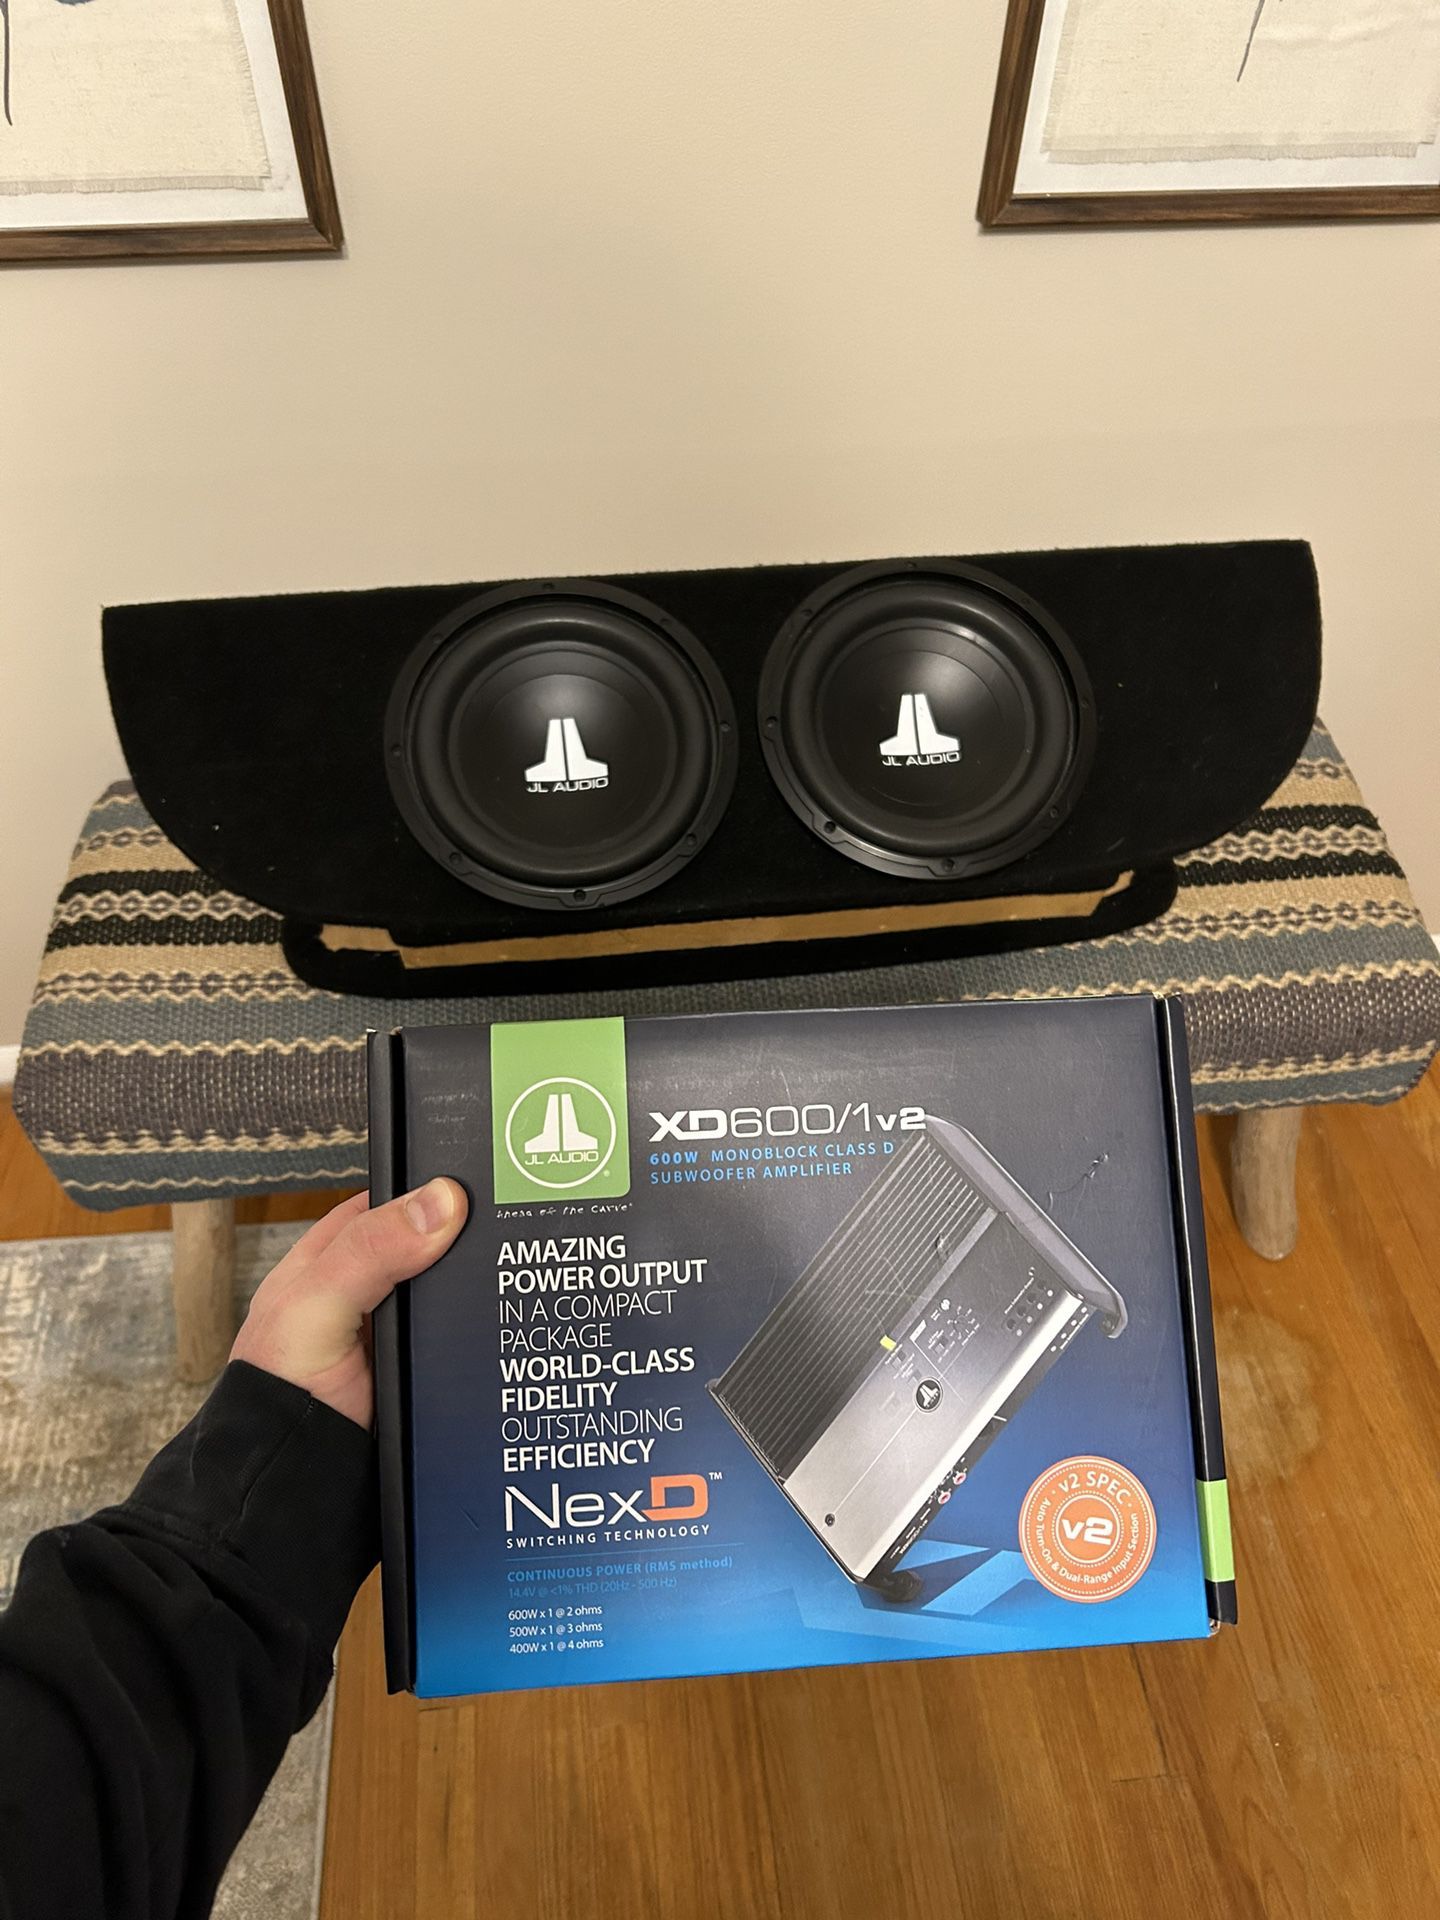 Subwoofers + Amplifier + Box : OBO